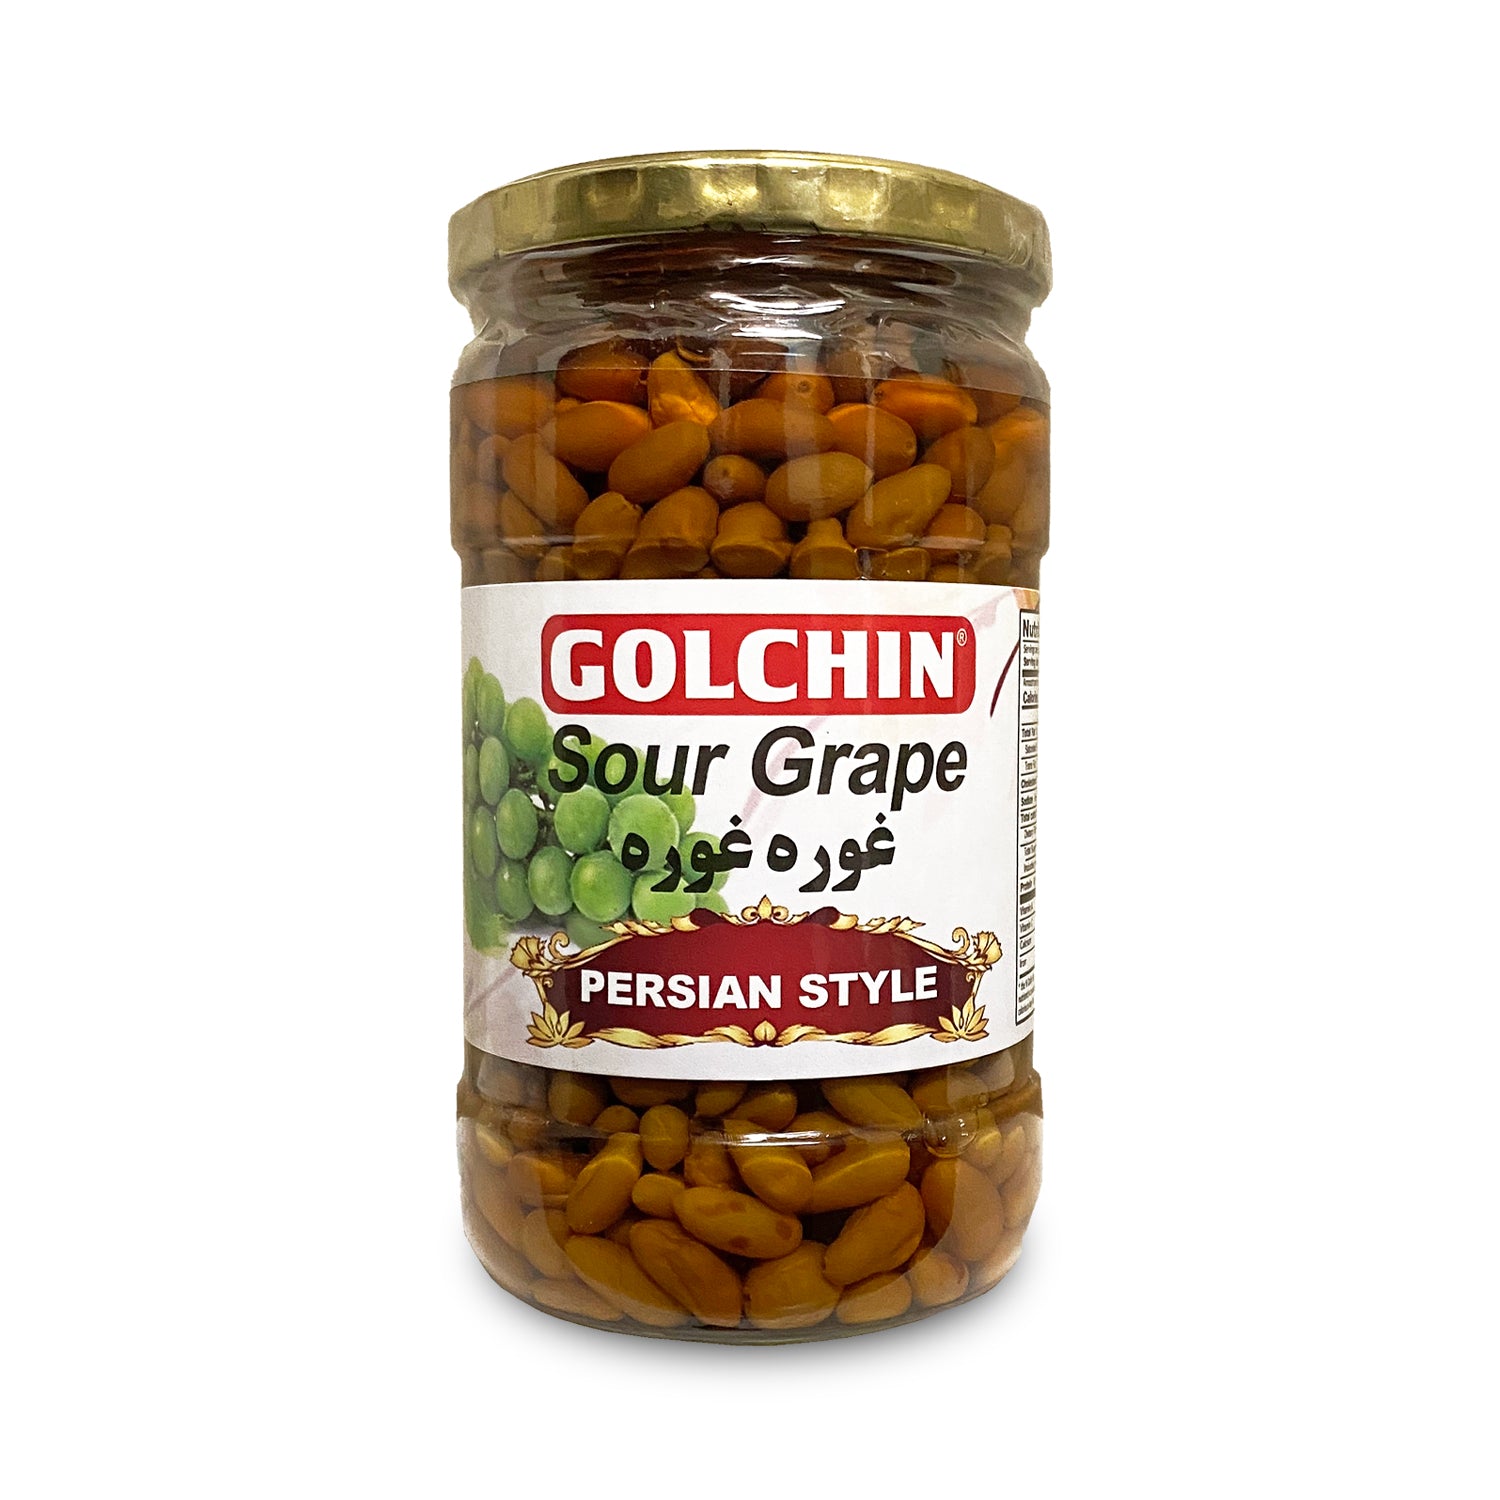 GOLCHIN PICKLED SOUR GRAPE (PERSIAN STYLE)